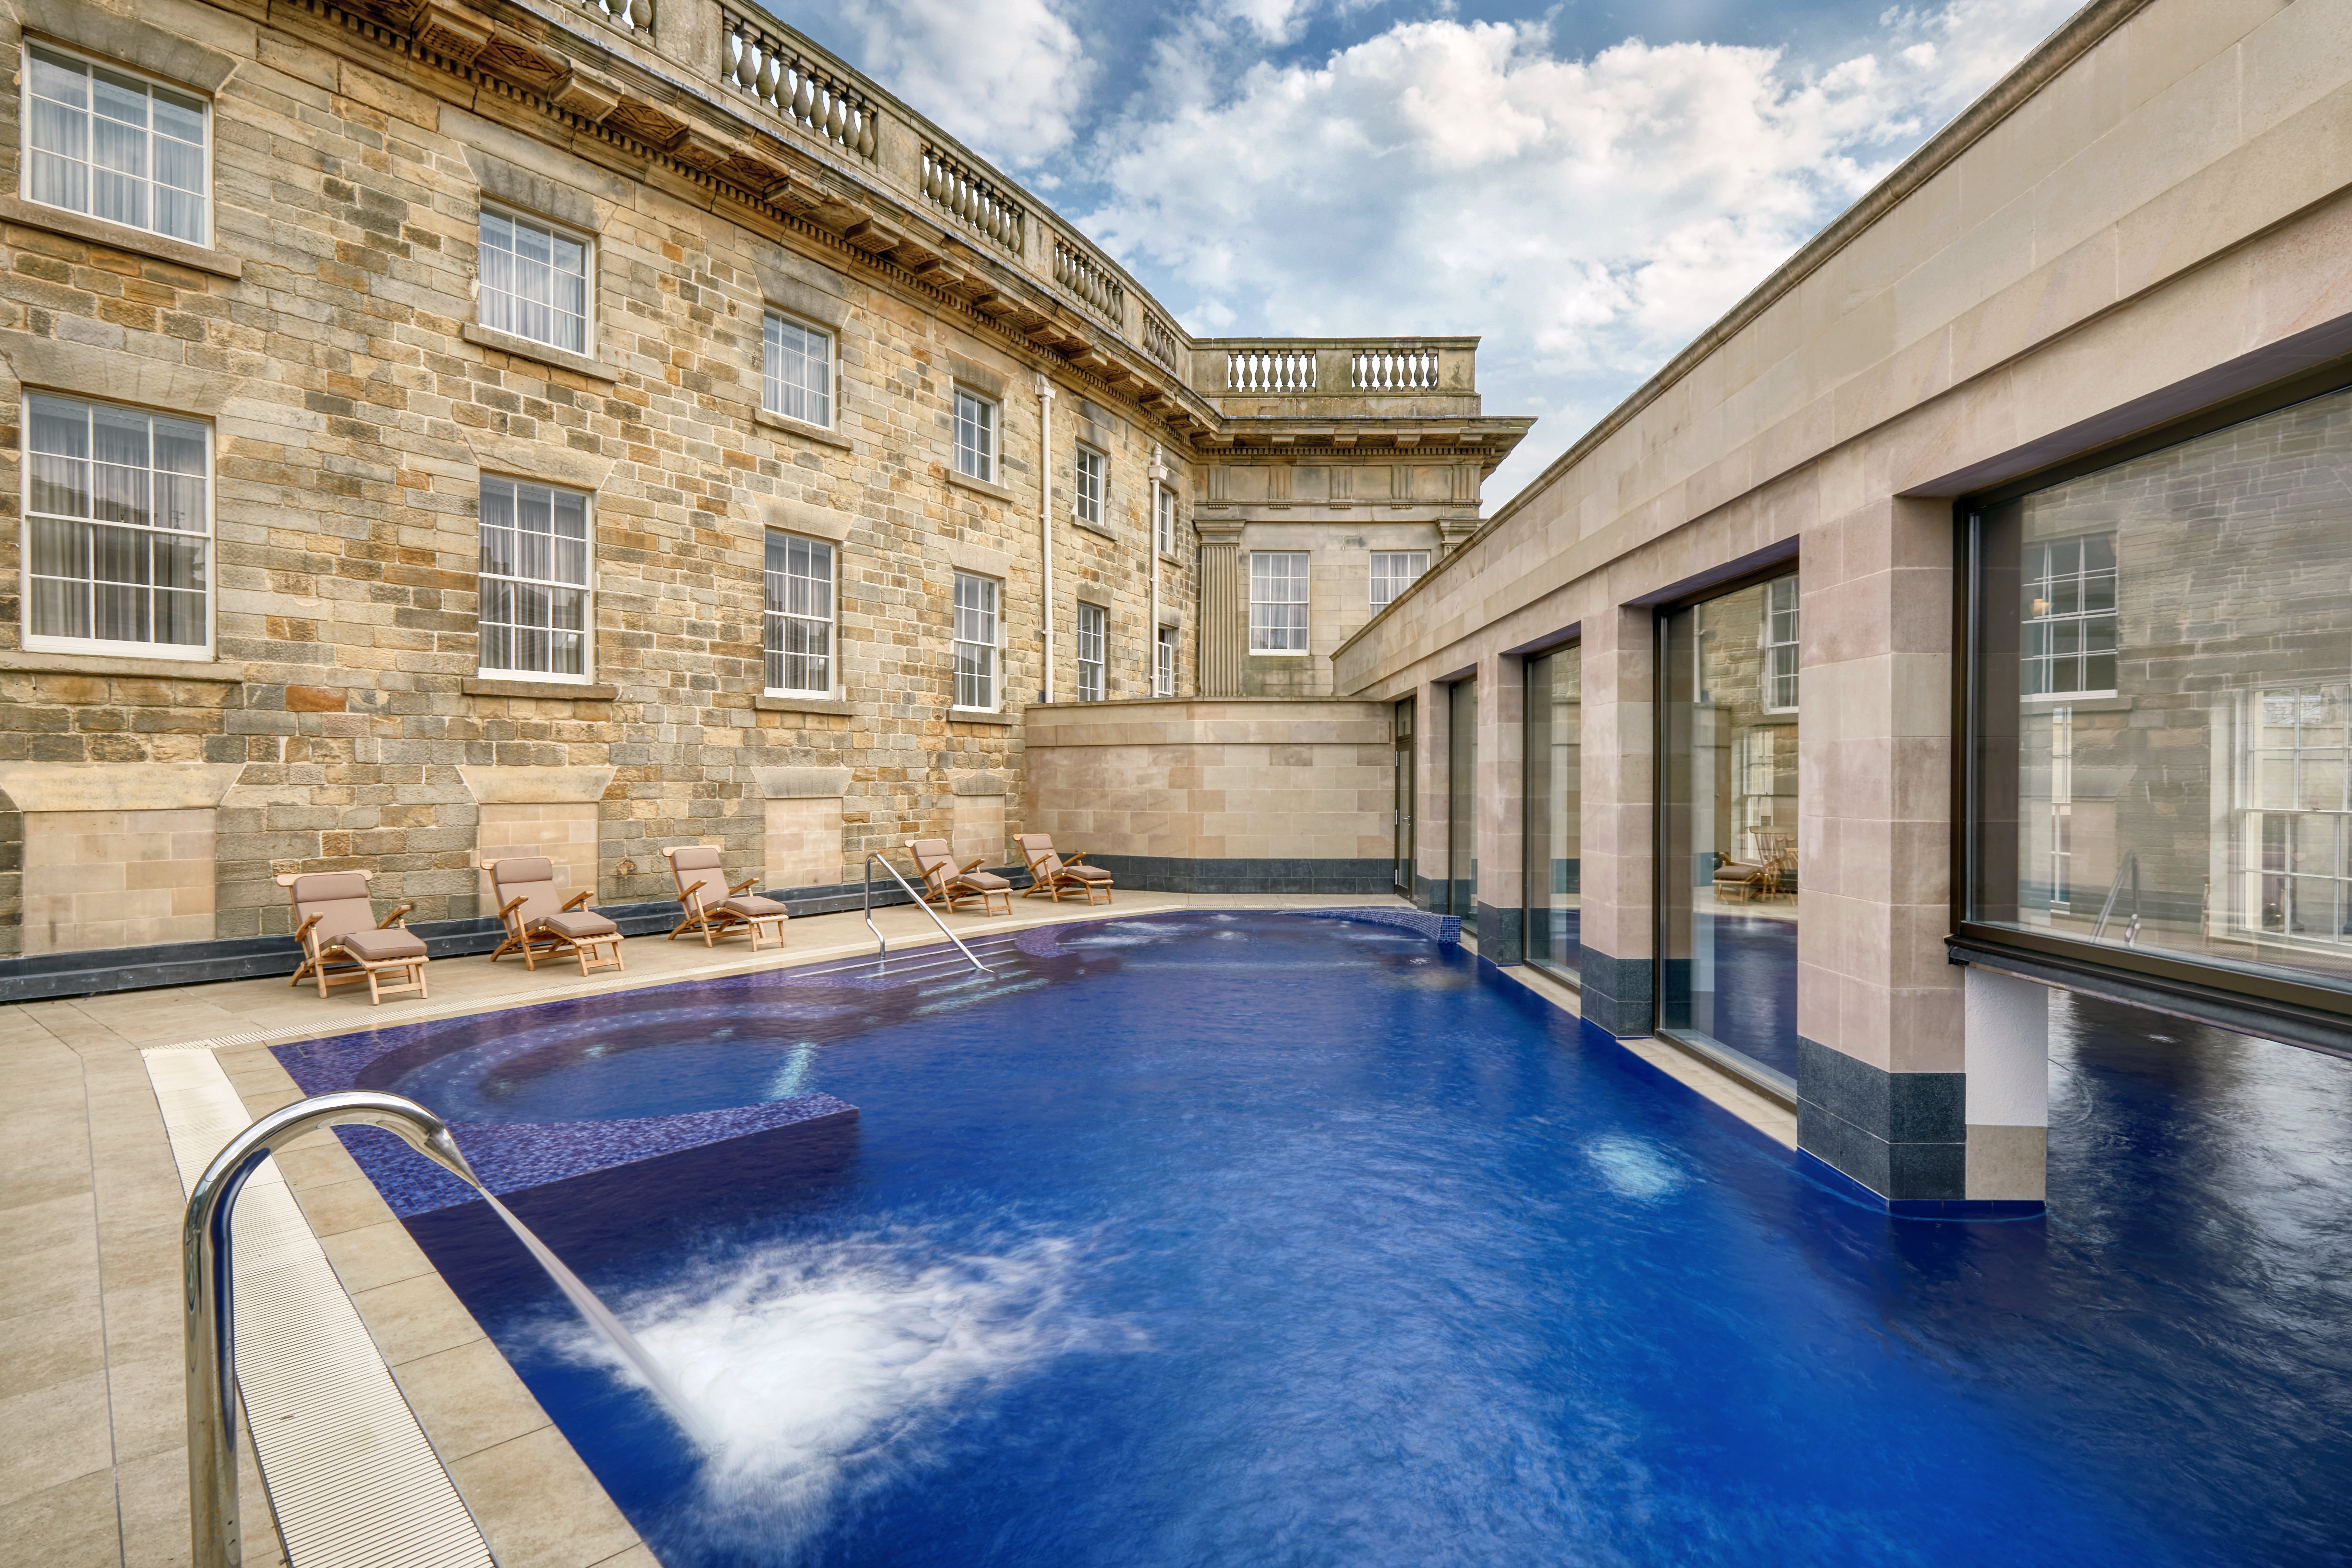 The outdoor pool at Buxton Crescent